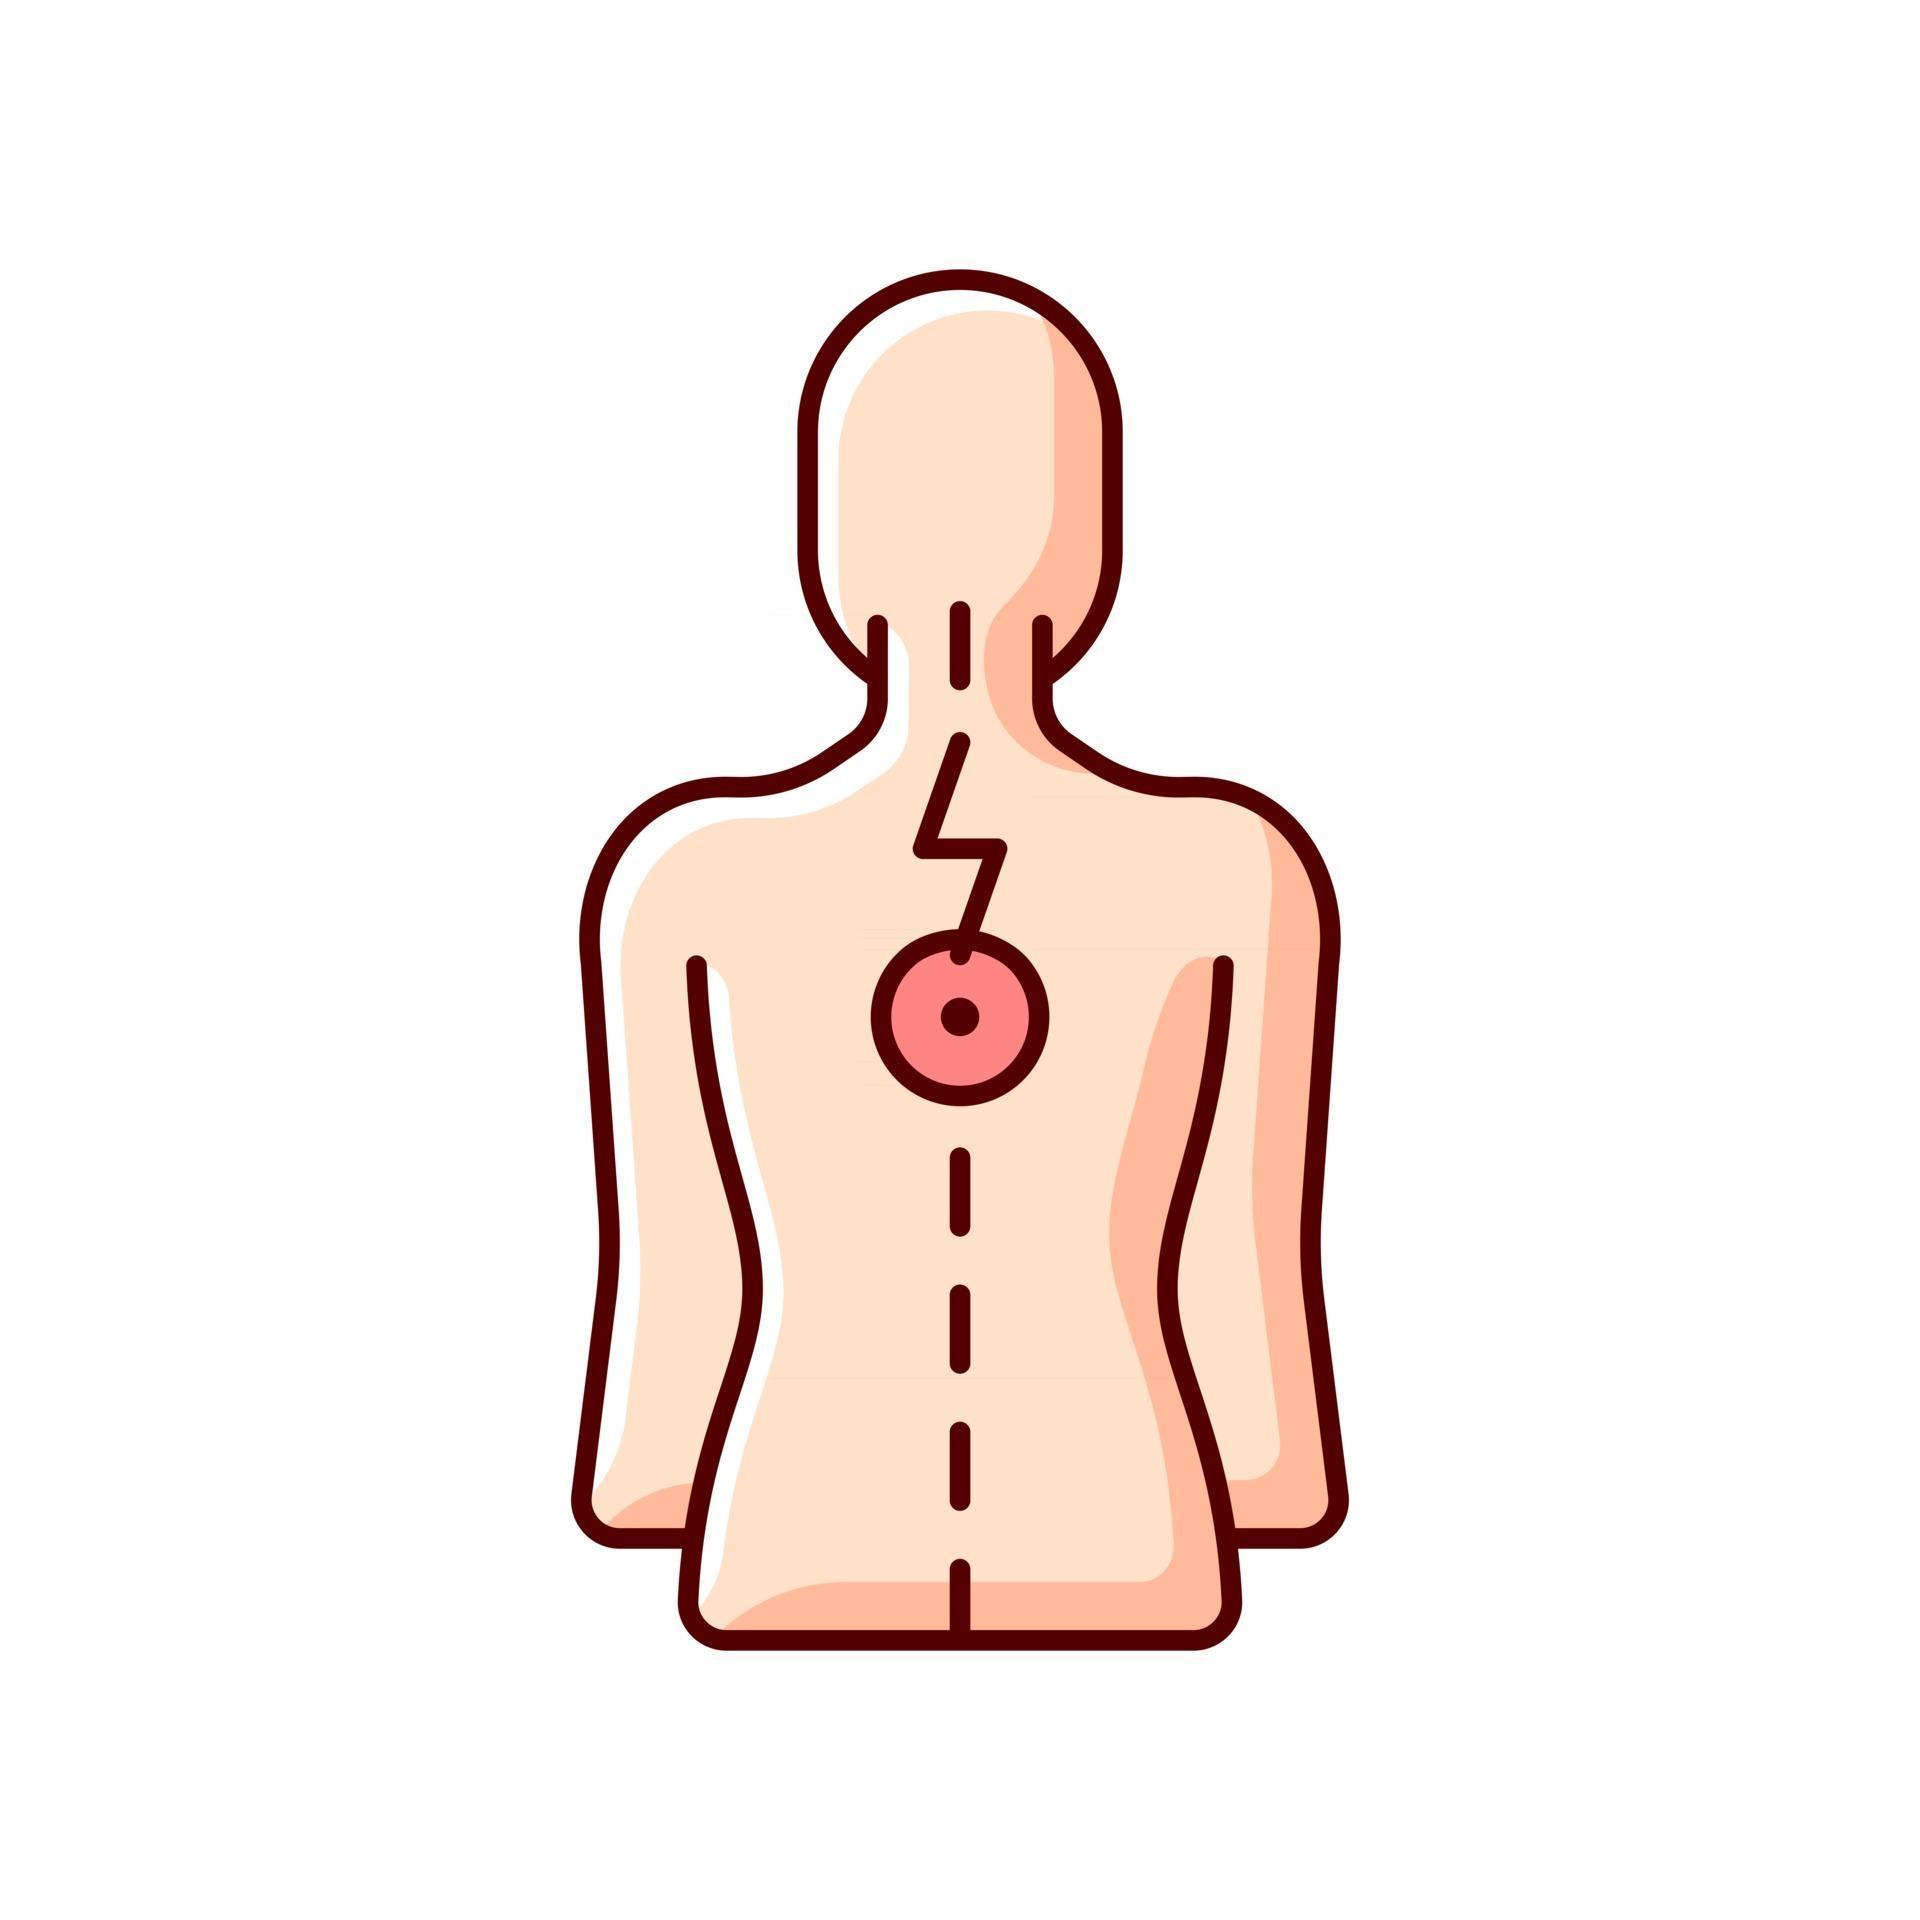 Pressure on spinal nerves RGB color icon. Muscle spasms. Pain between shoulder blades. Numbness, tingling. Damage to spinal cord. Vertebrae dislocation. Upper back pain. Isolated vector illustration